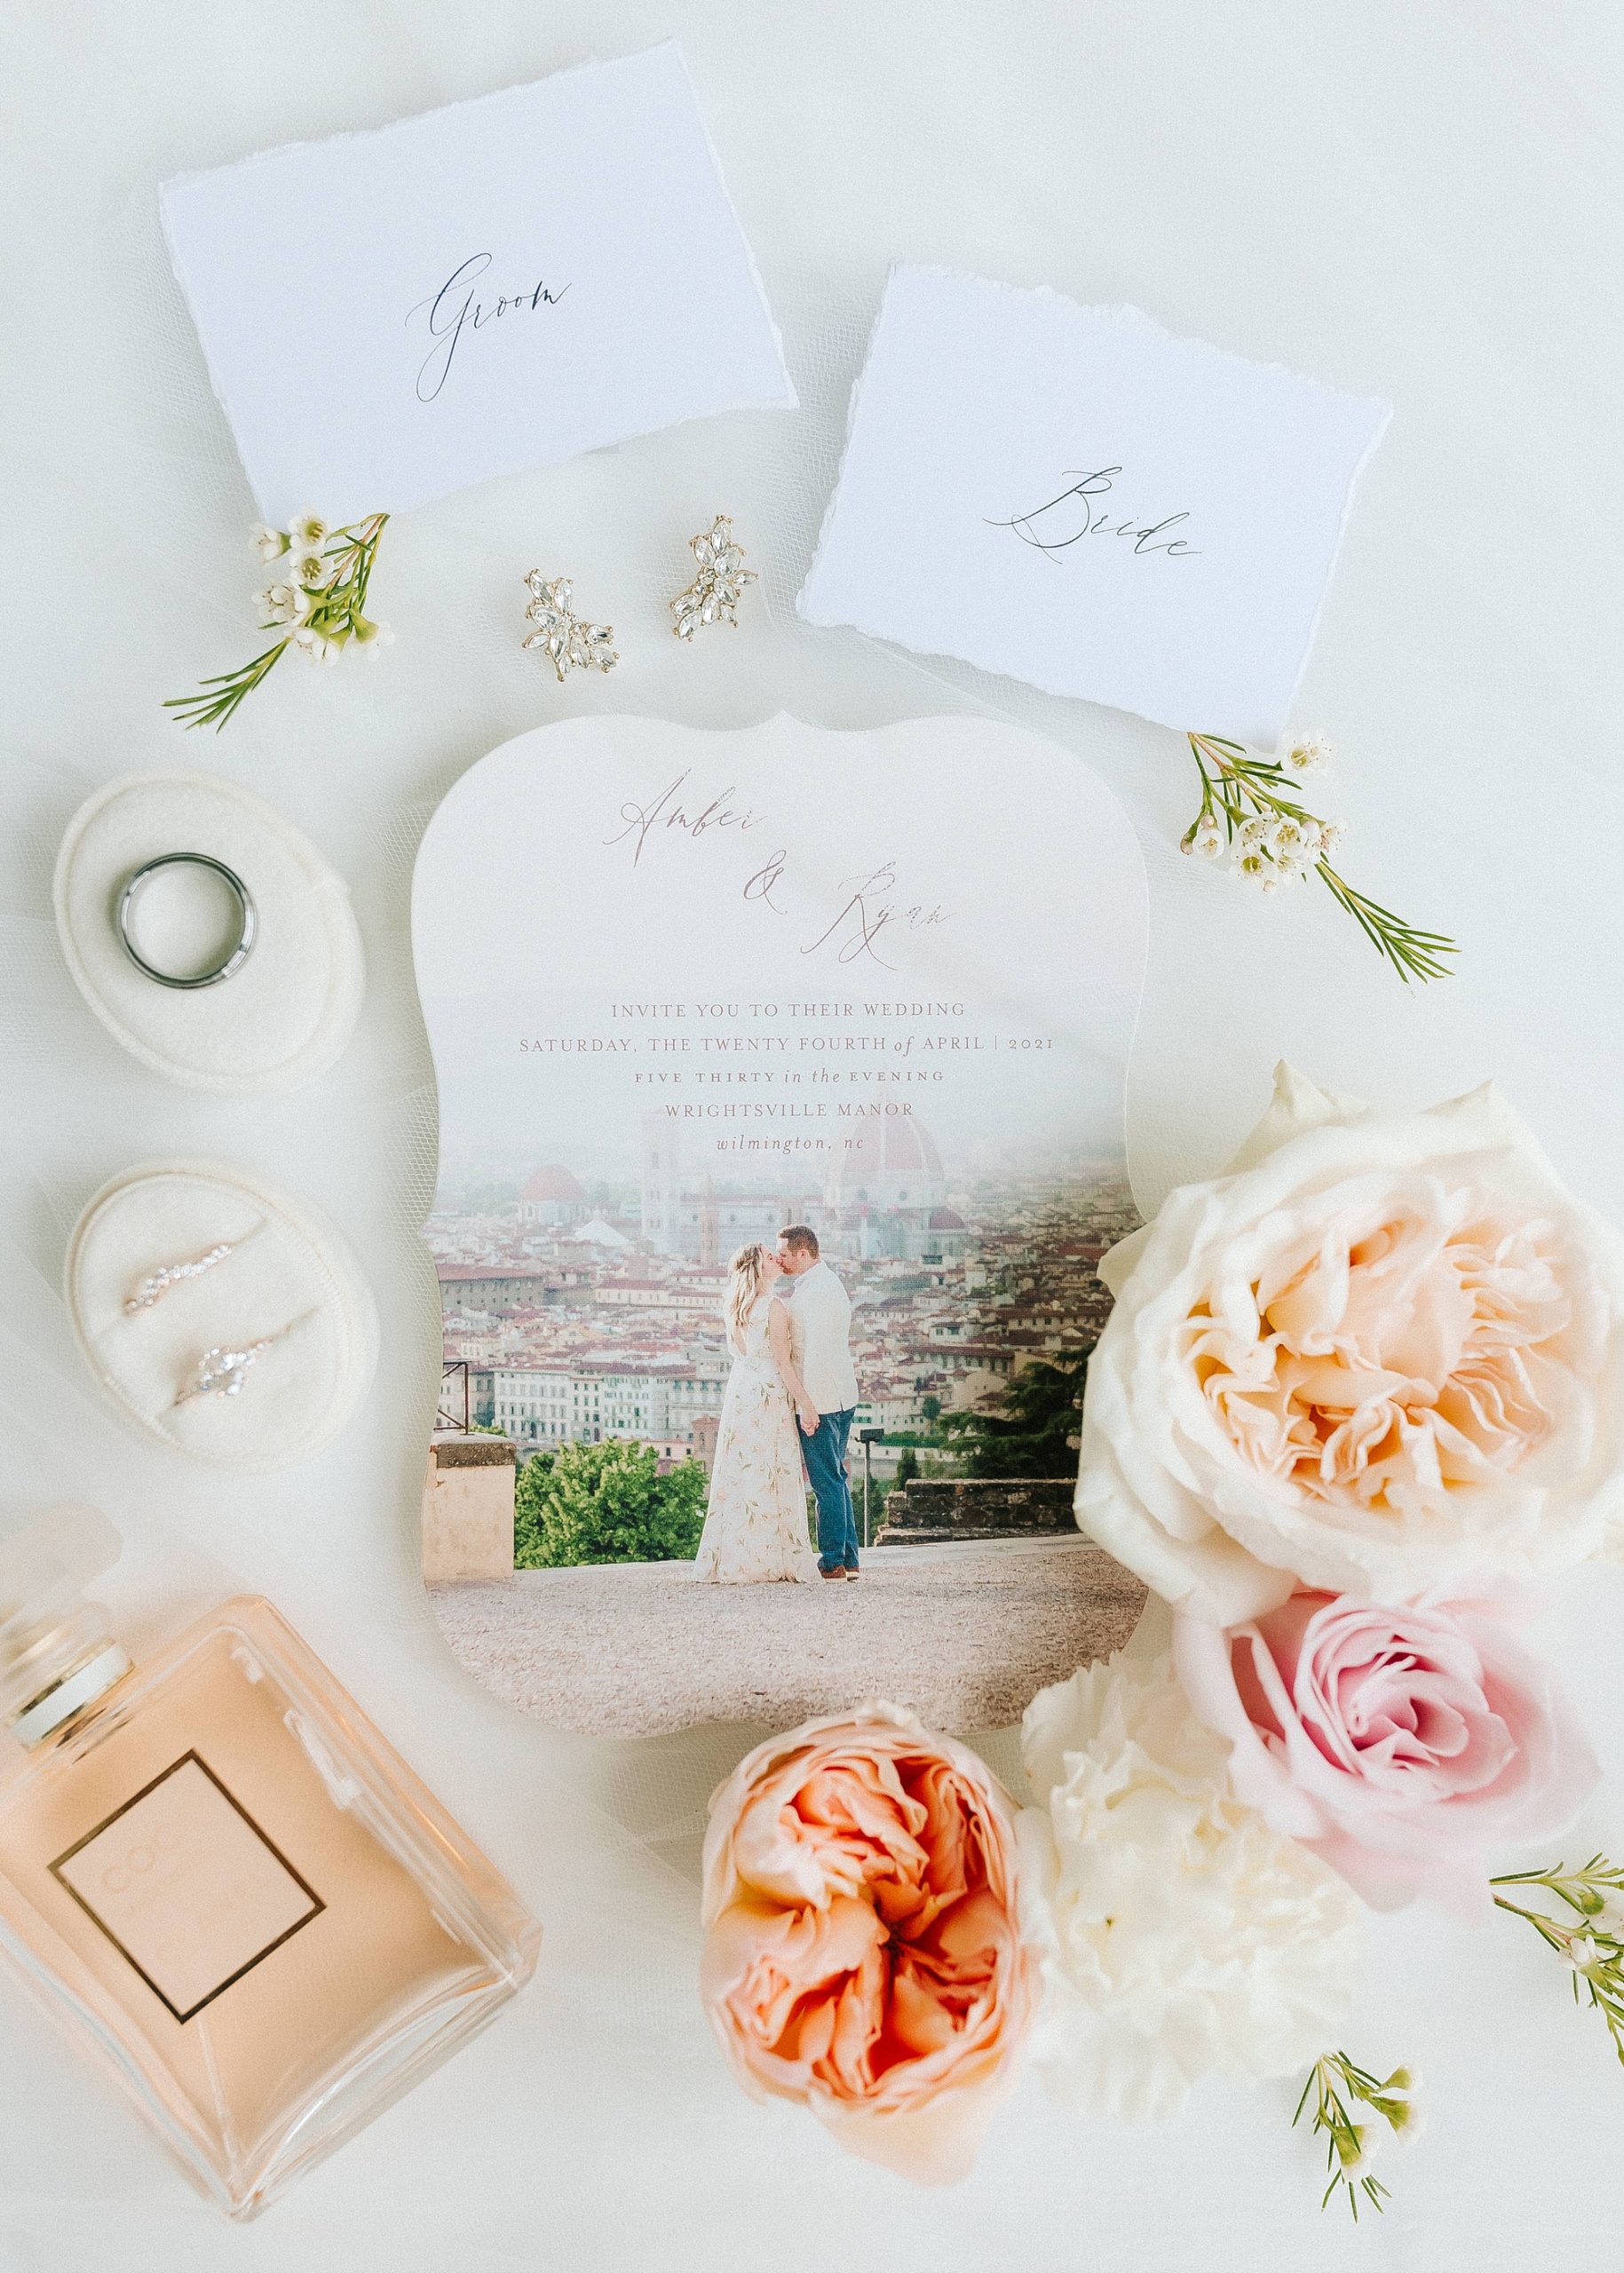 invitation suite for spring wedding at Wrightsville Manor